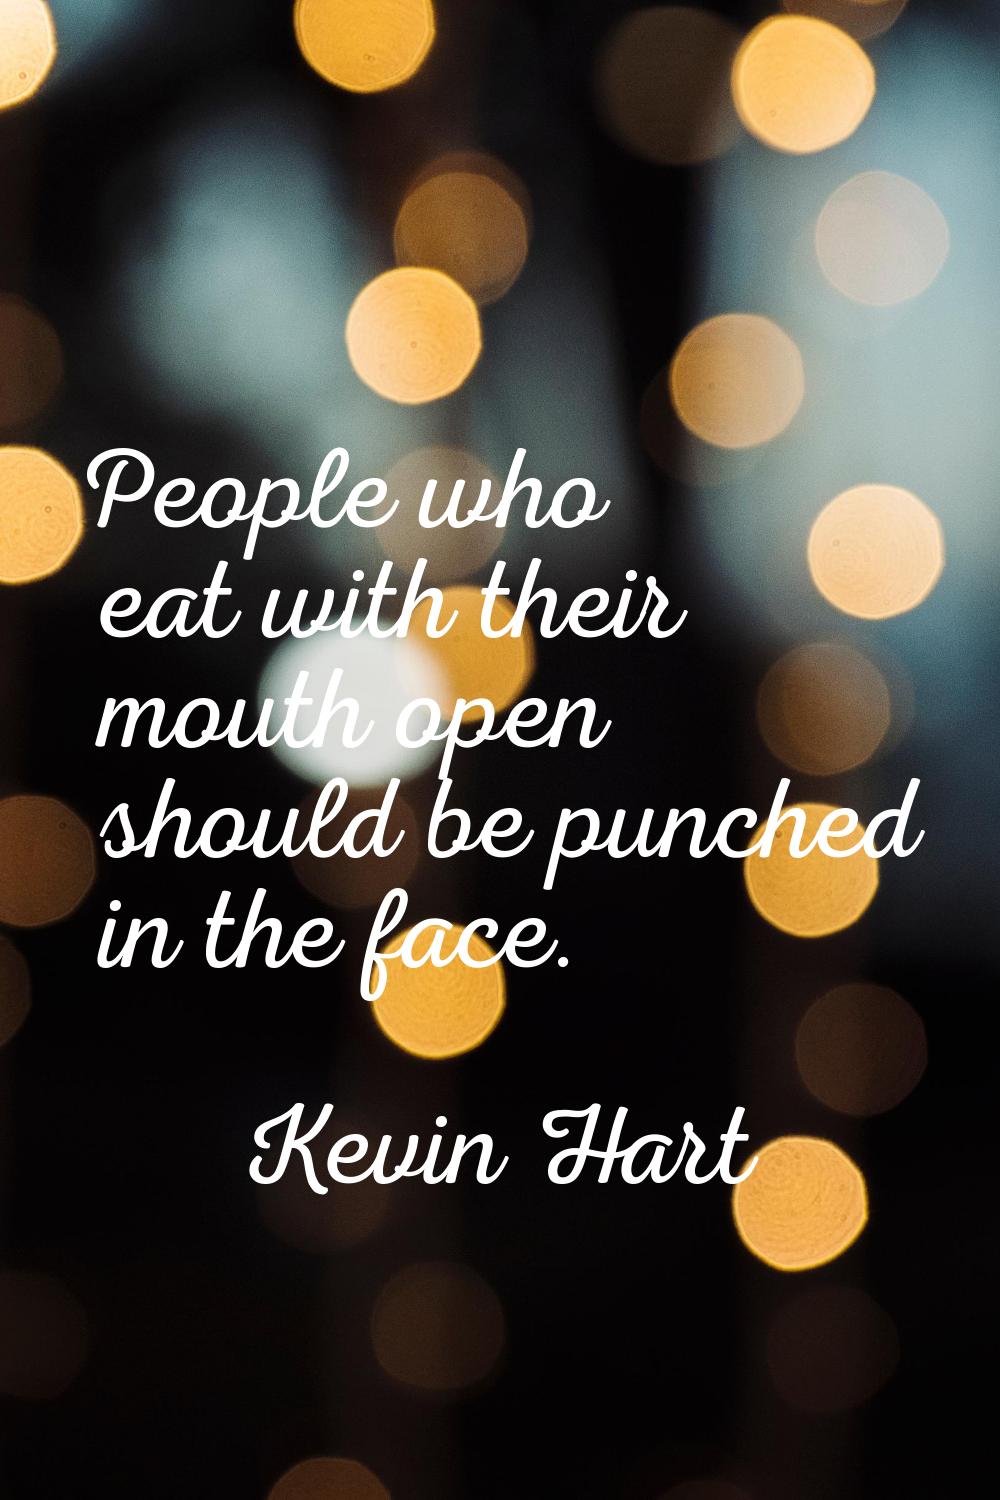 People who eat with their mouth open should be punched in the face.